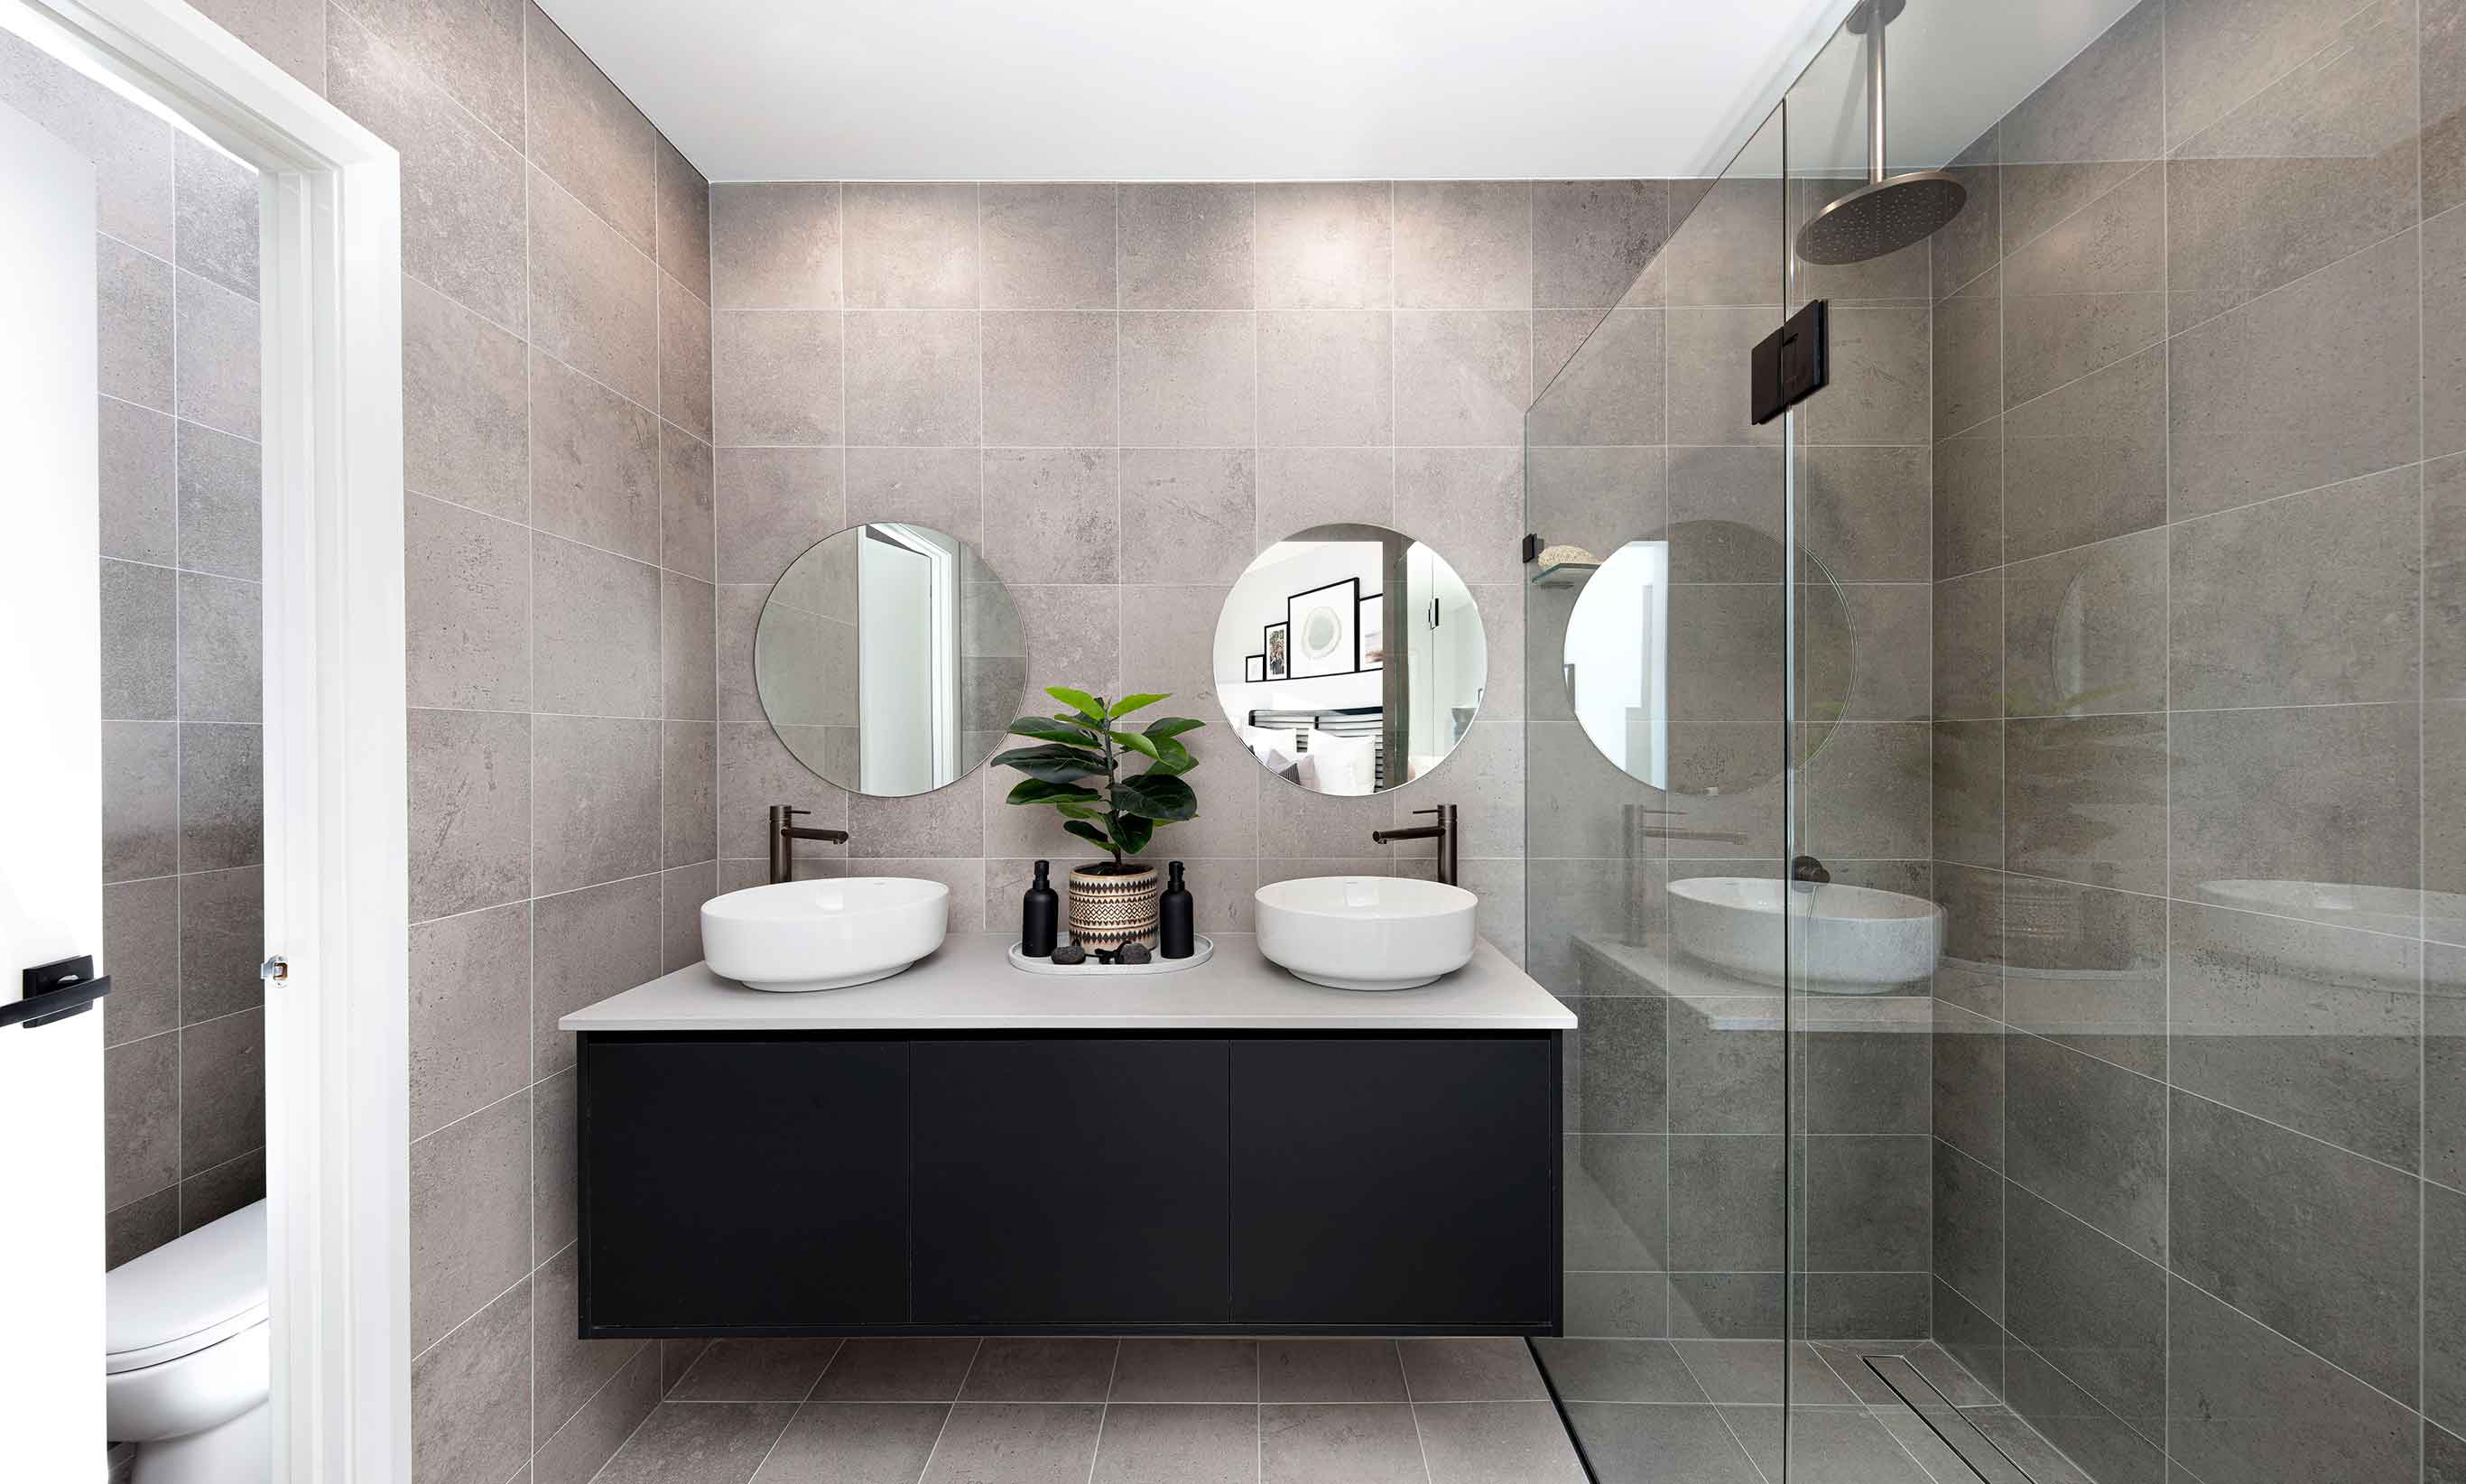 Tips on choosing the perfect tiles